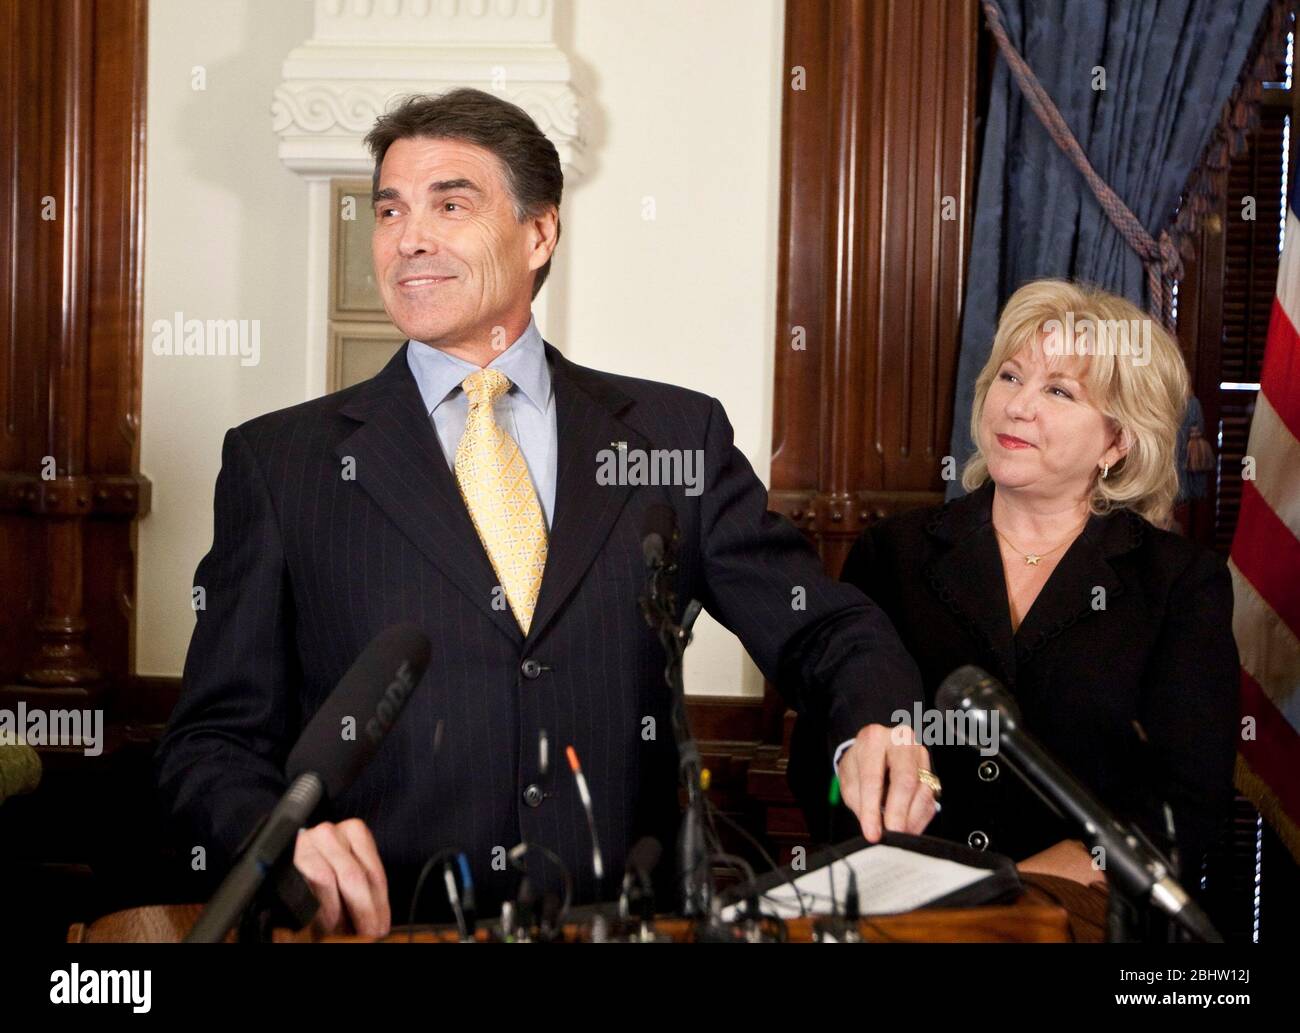 Austin, Texas USA, July 18 2011: Texas Governor Rick Perry answers questions regarding his possible presidential run, as state Sen. Jane Nelson looks on. ©Marjorie Kamys Cotera/Daemmrich Photography Stock Photo